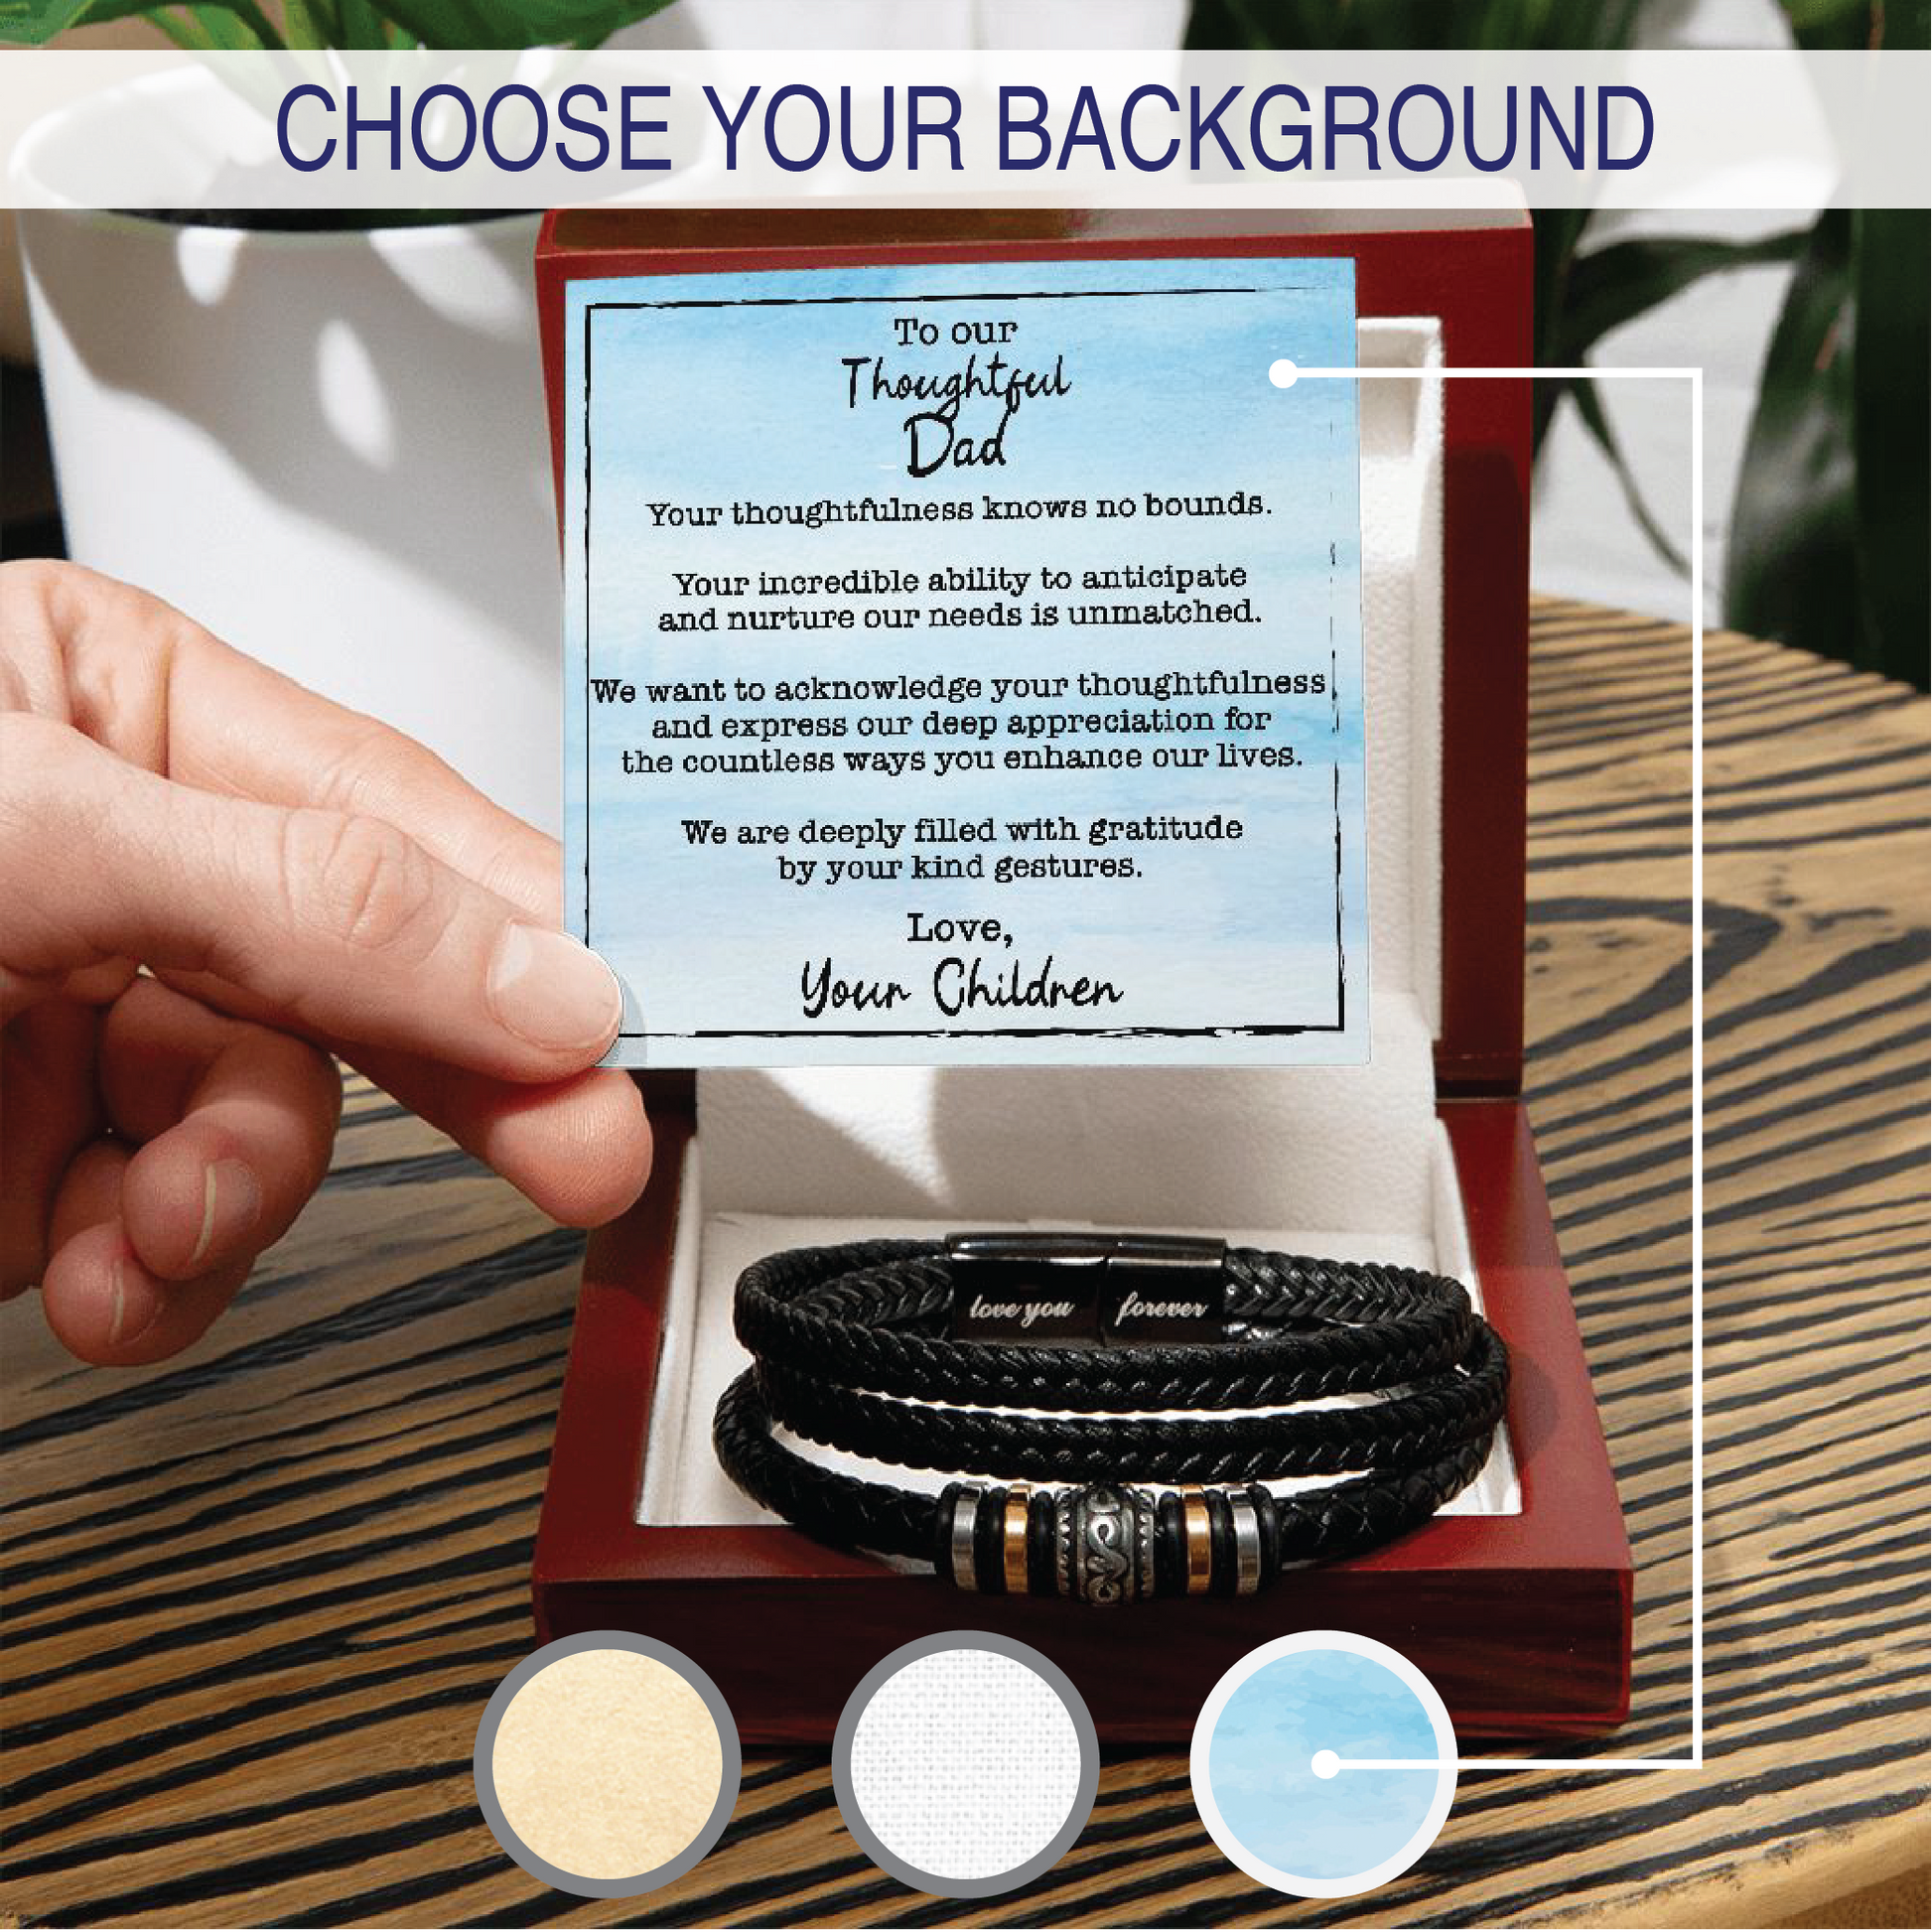 Customizable Background - Men's Love You Forever Bracelet With Wooden Box With LED And Message Card For Thoughtful Dad - Elegant Endearments